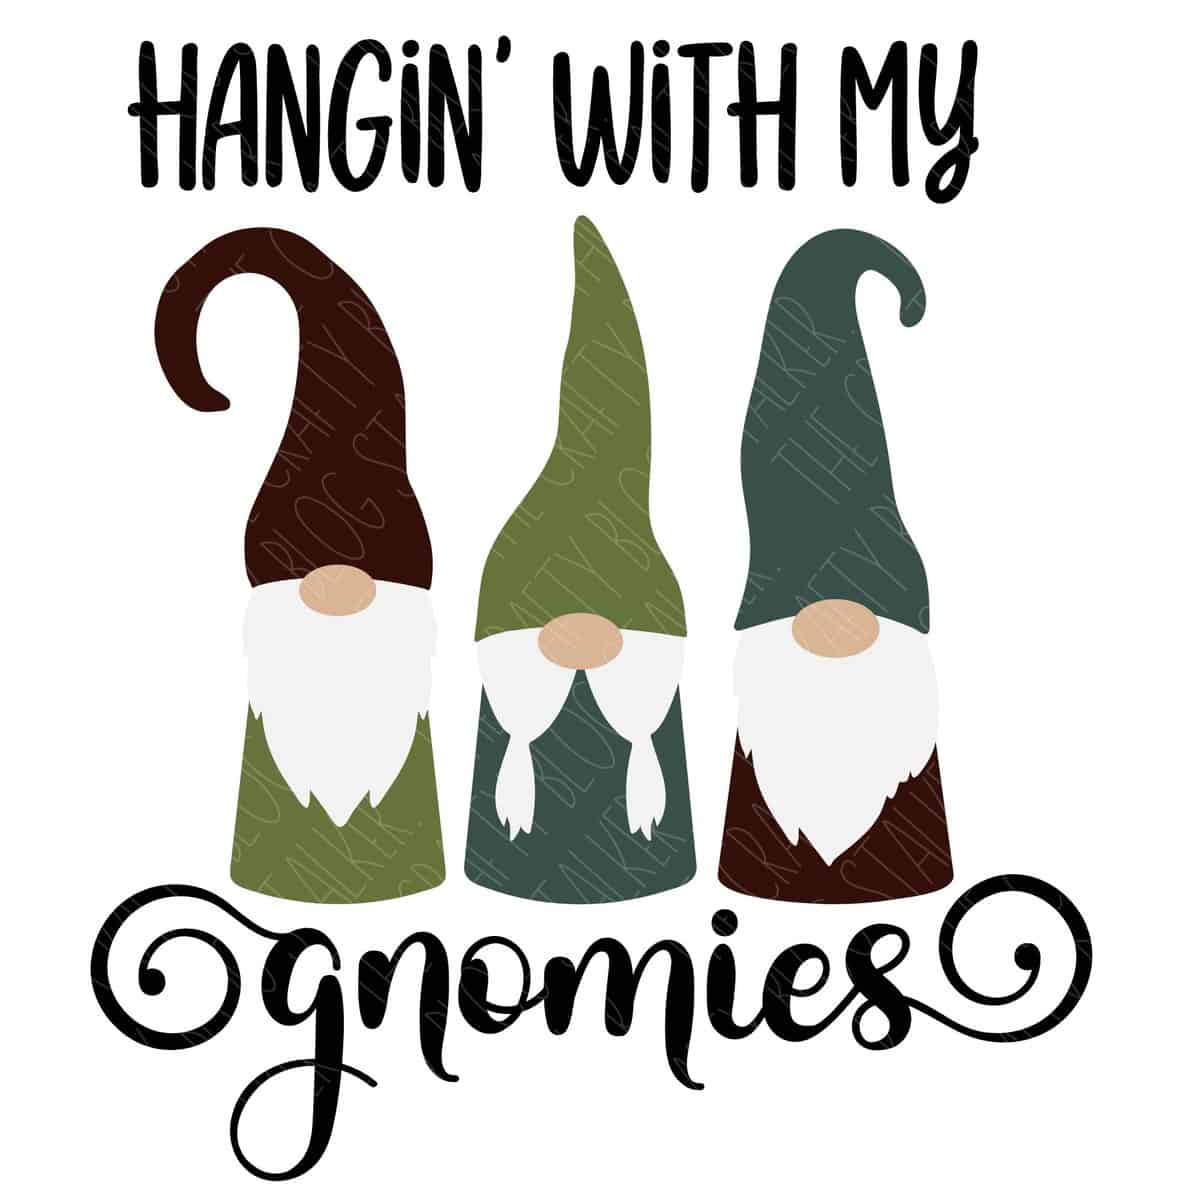 Hangin' With My Gnomies SVG	

			
		
	

		
			$2.50 – Buy Now Checkout
							
					
						
							
						
						Added to cart